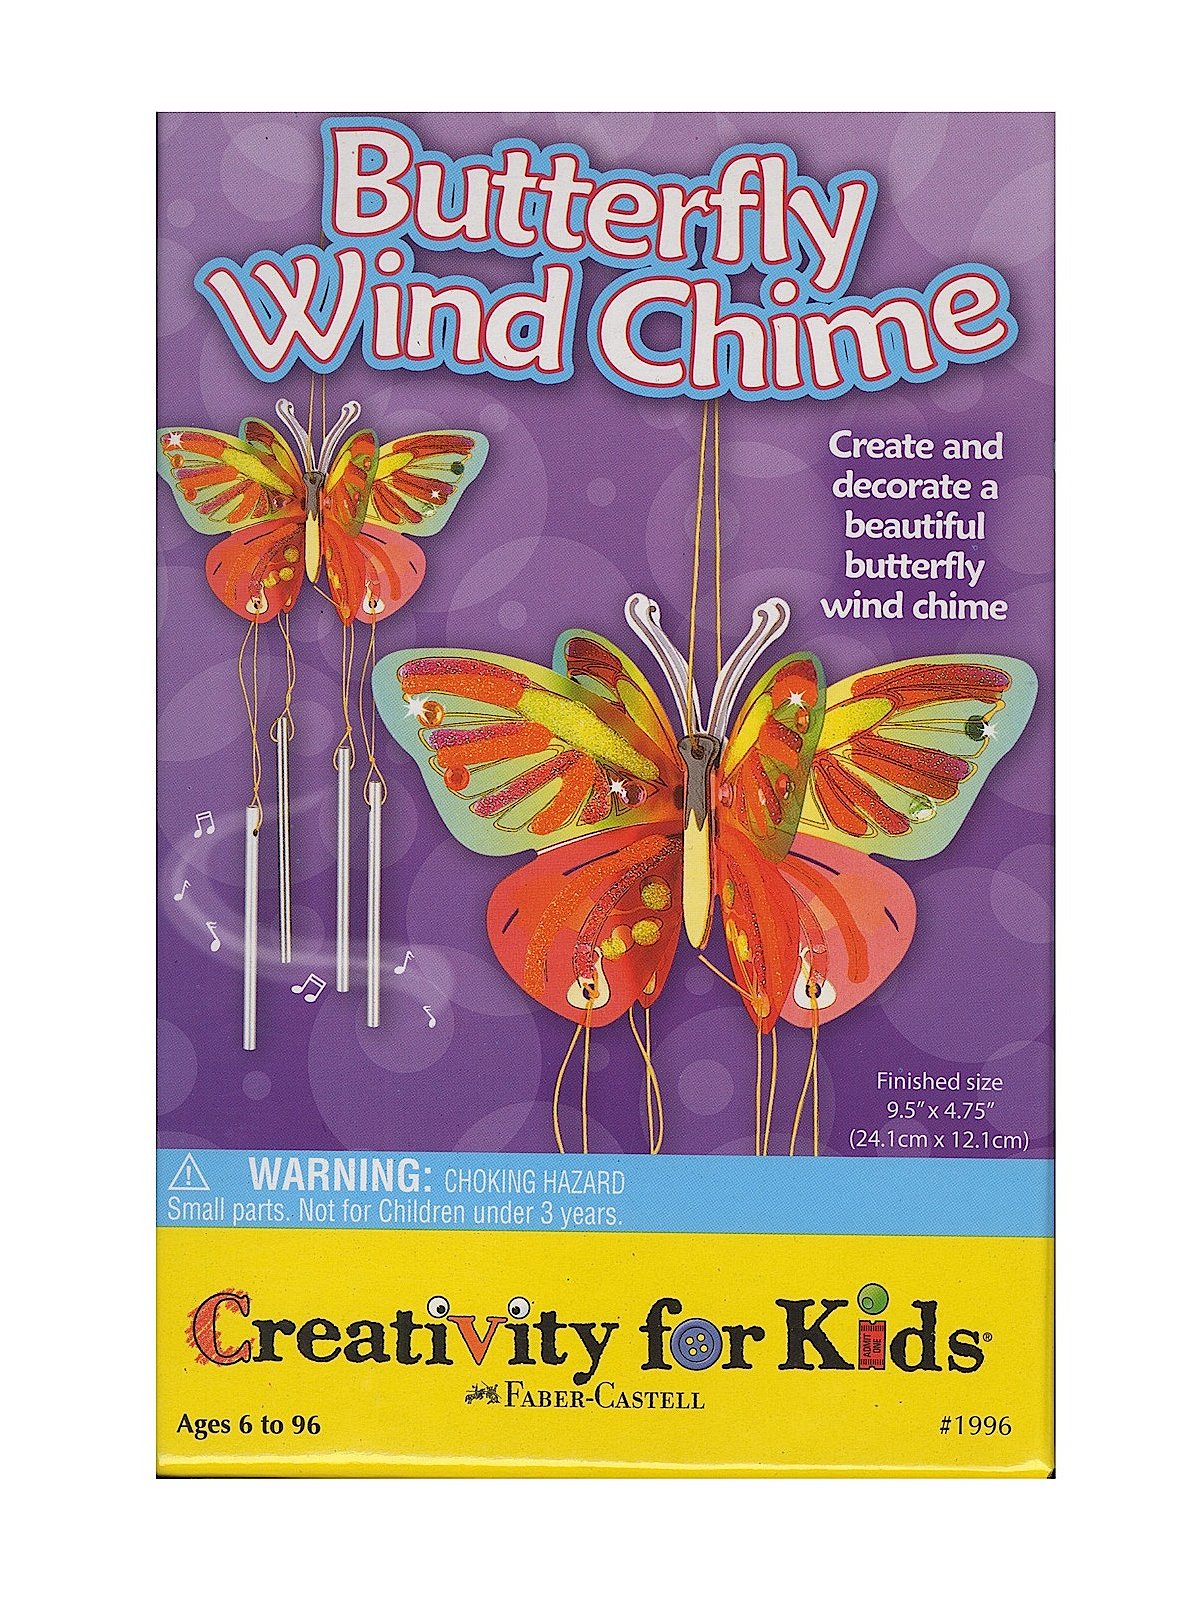 Creativity for Kids Butterfly Wind Chime Mini Kit